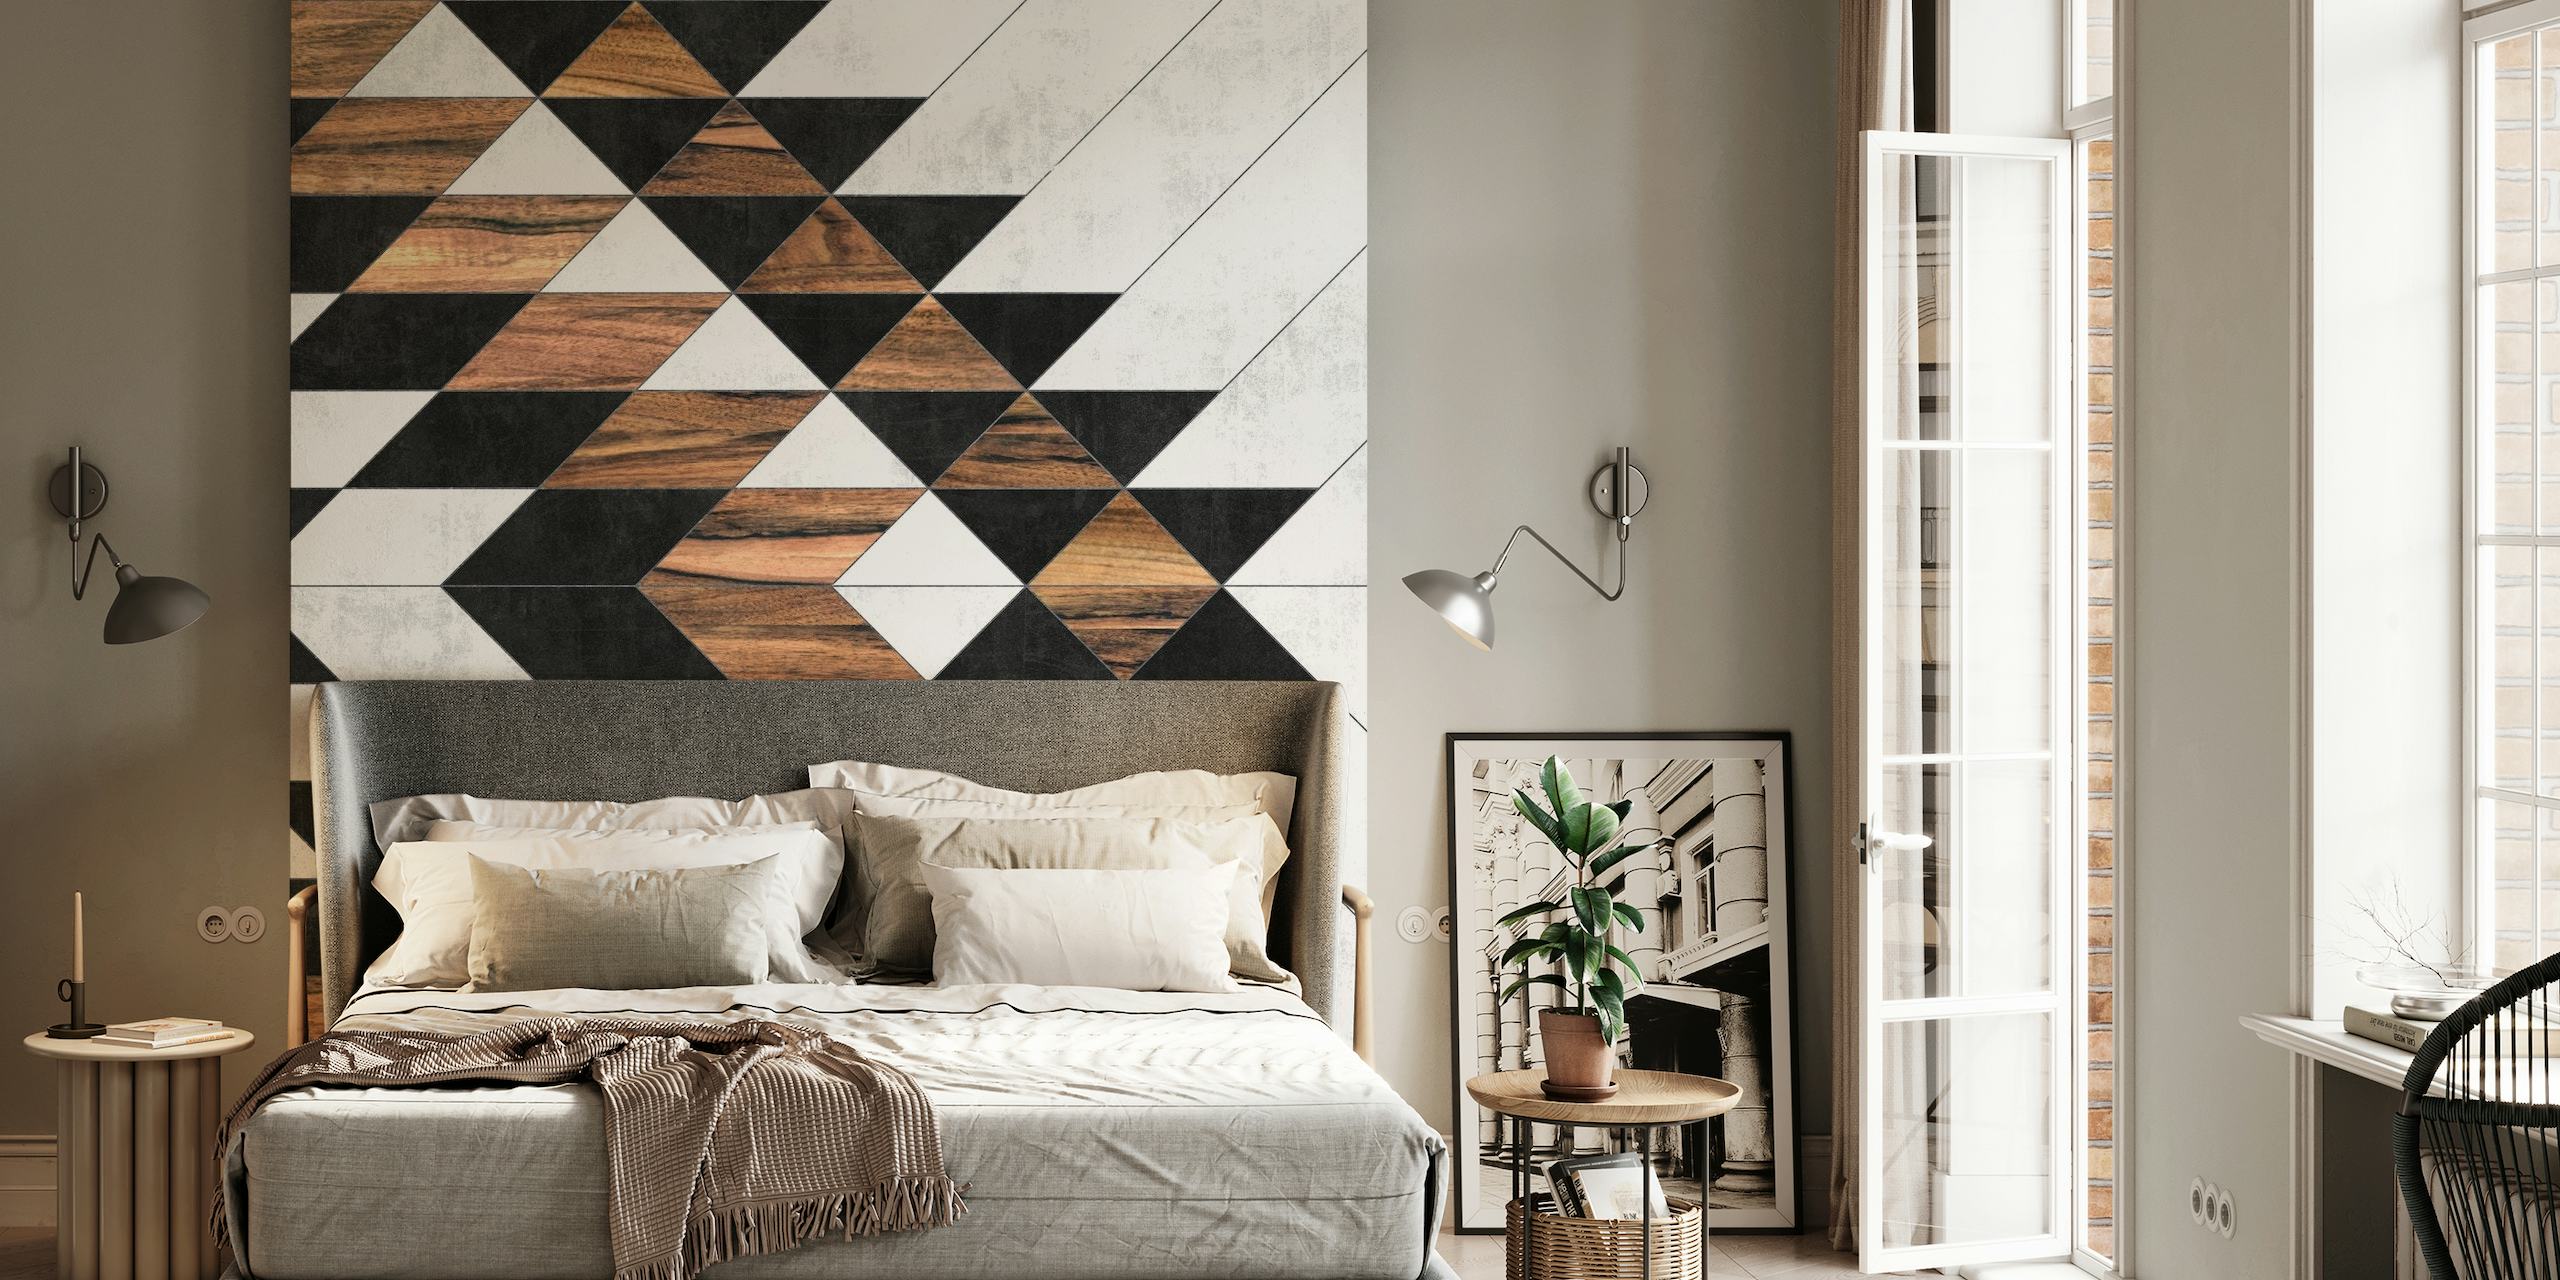 Urban Tribal Pattern No 9 wall mural with black, white, and wood texture triangles